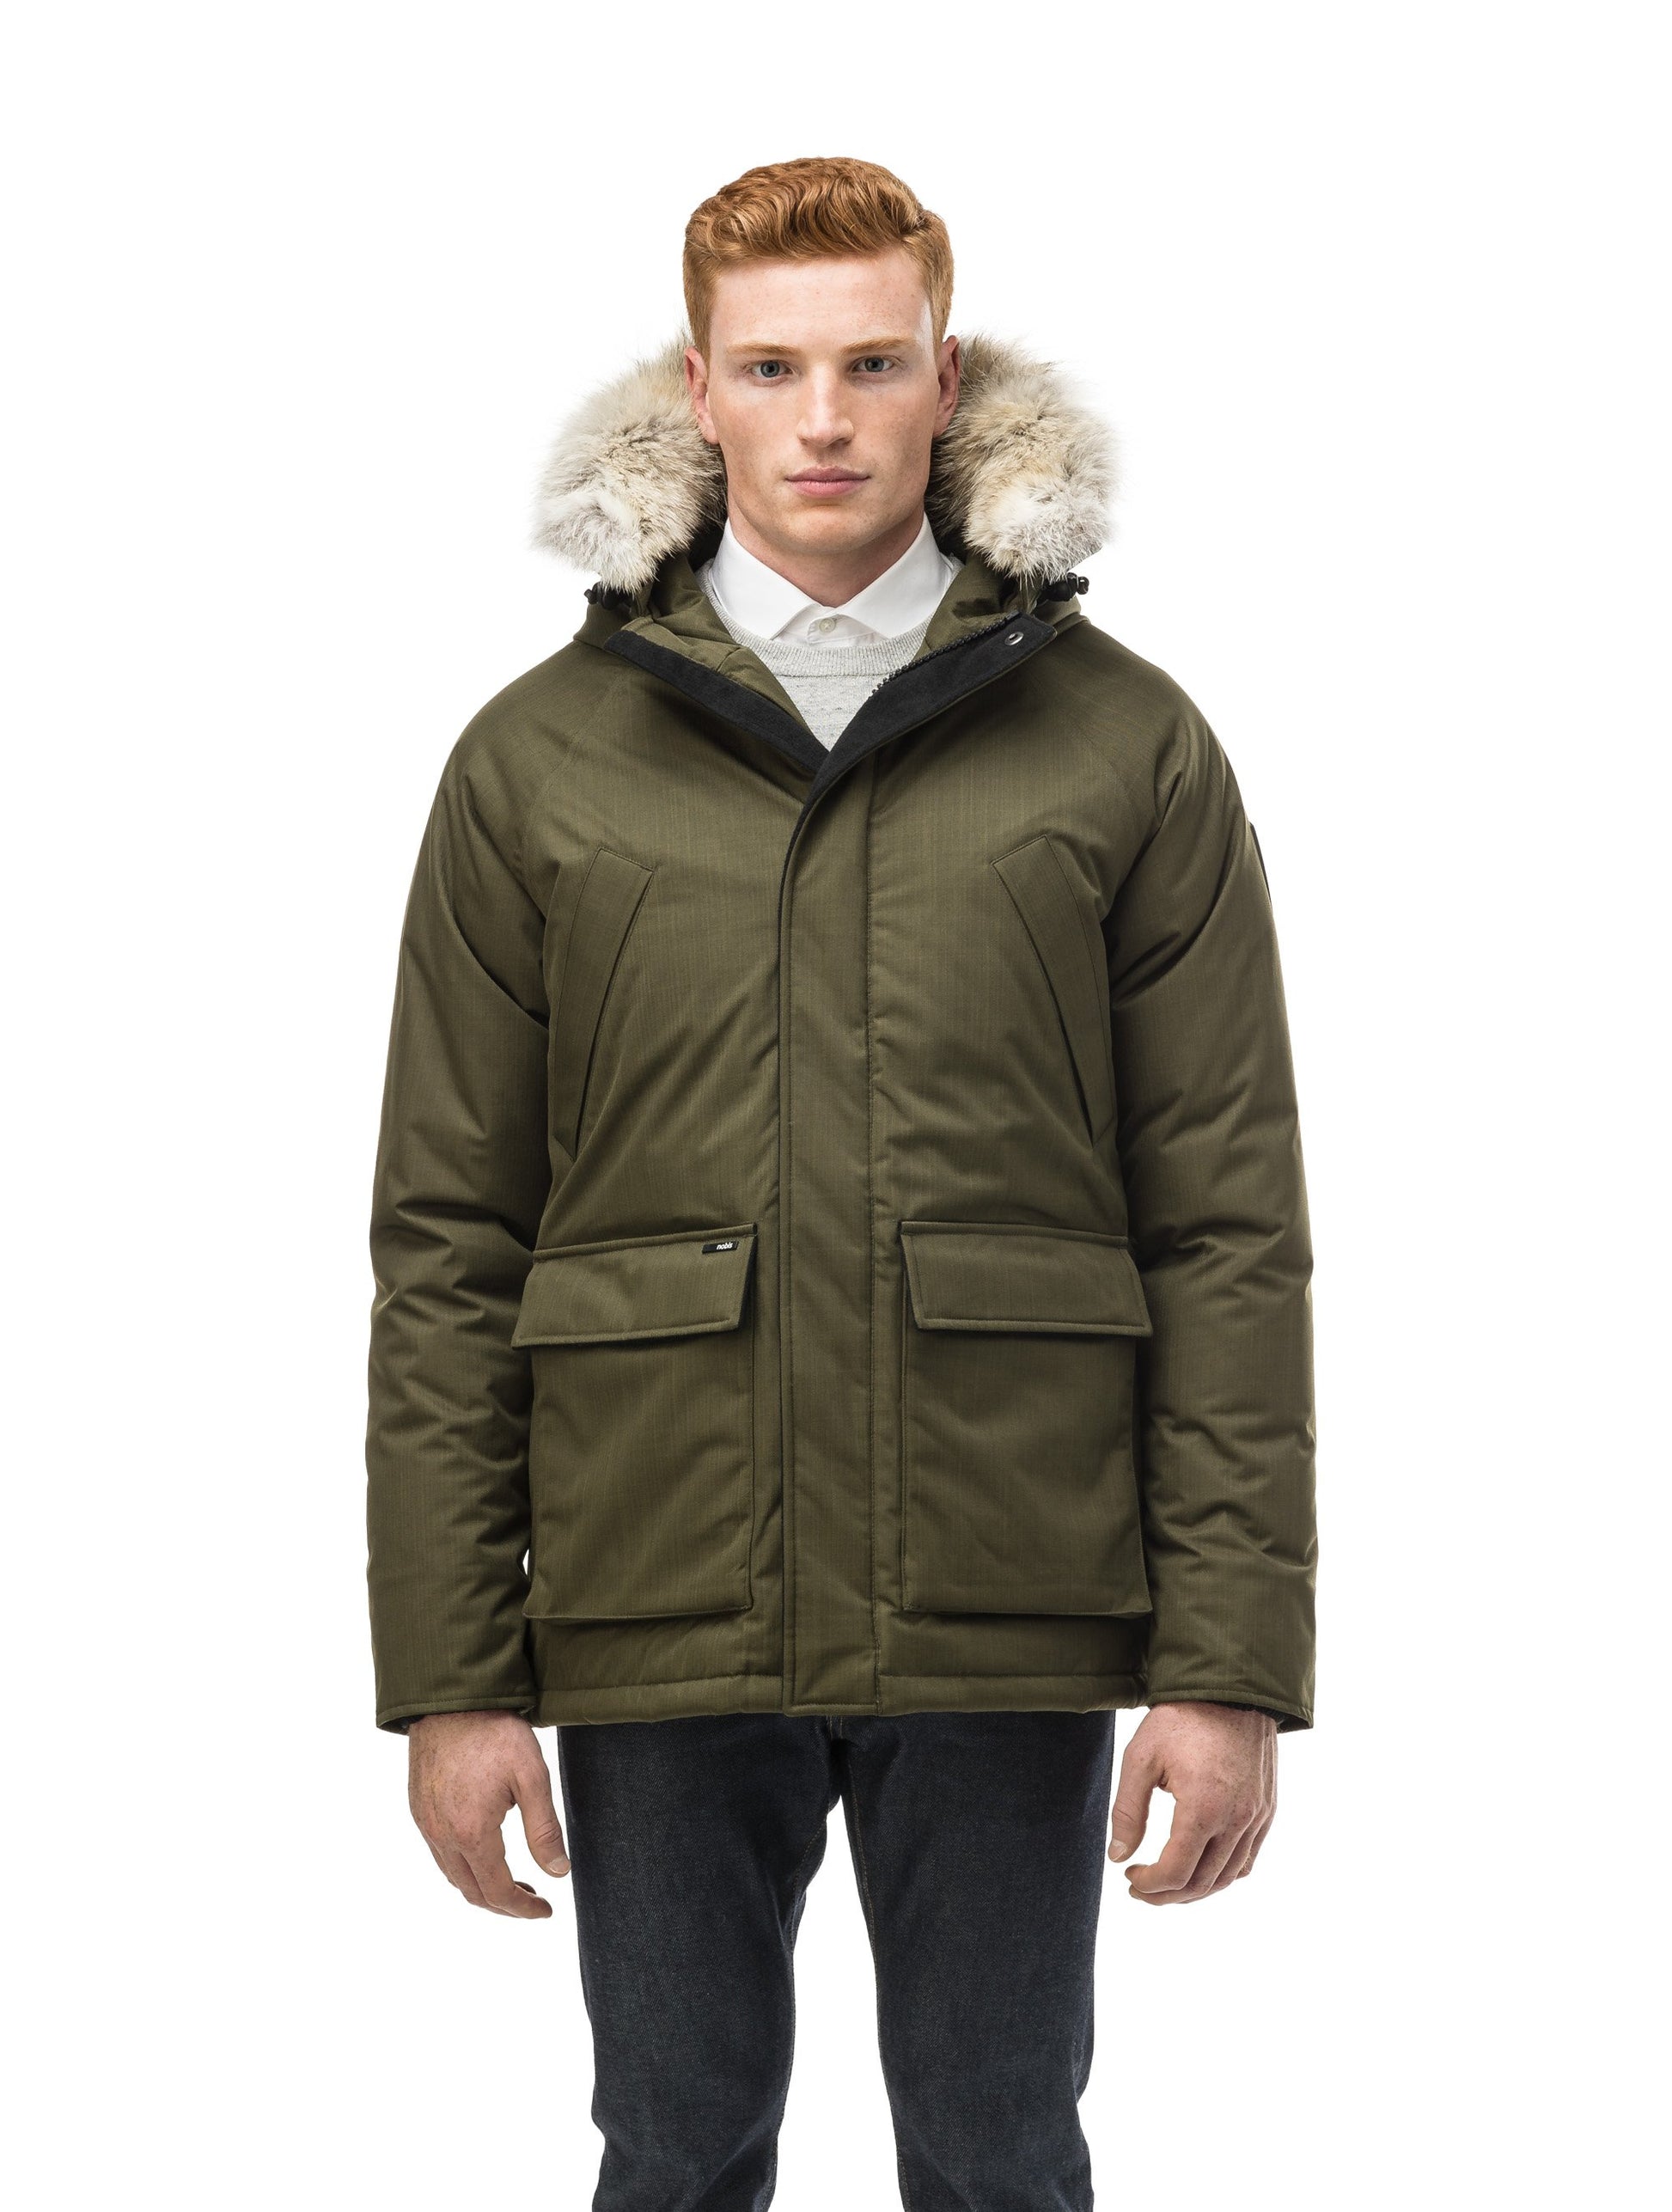 Men's waist length down filled jacket with two front pockets with magnetic closure and a removable fur trim on the hood in CH Fatigue